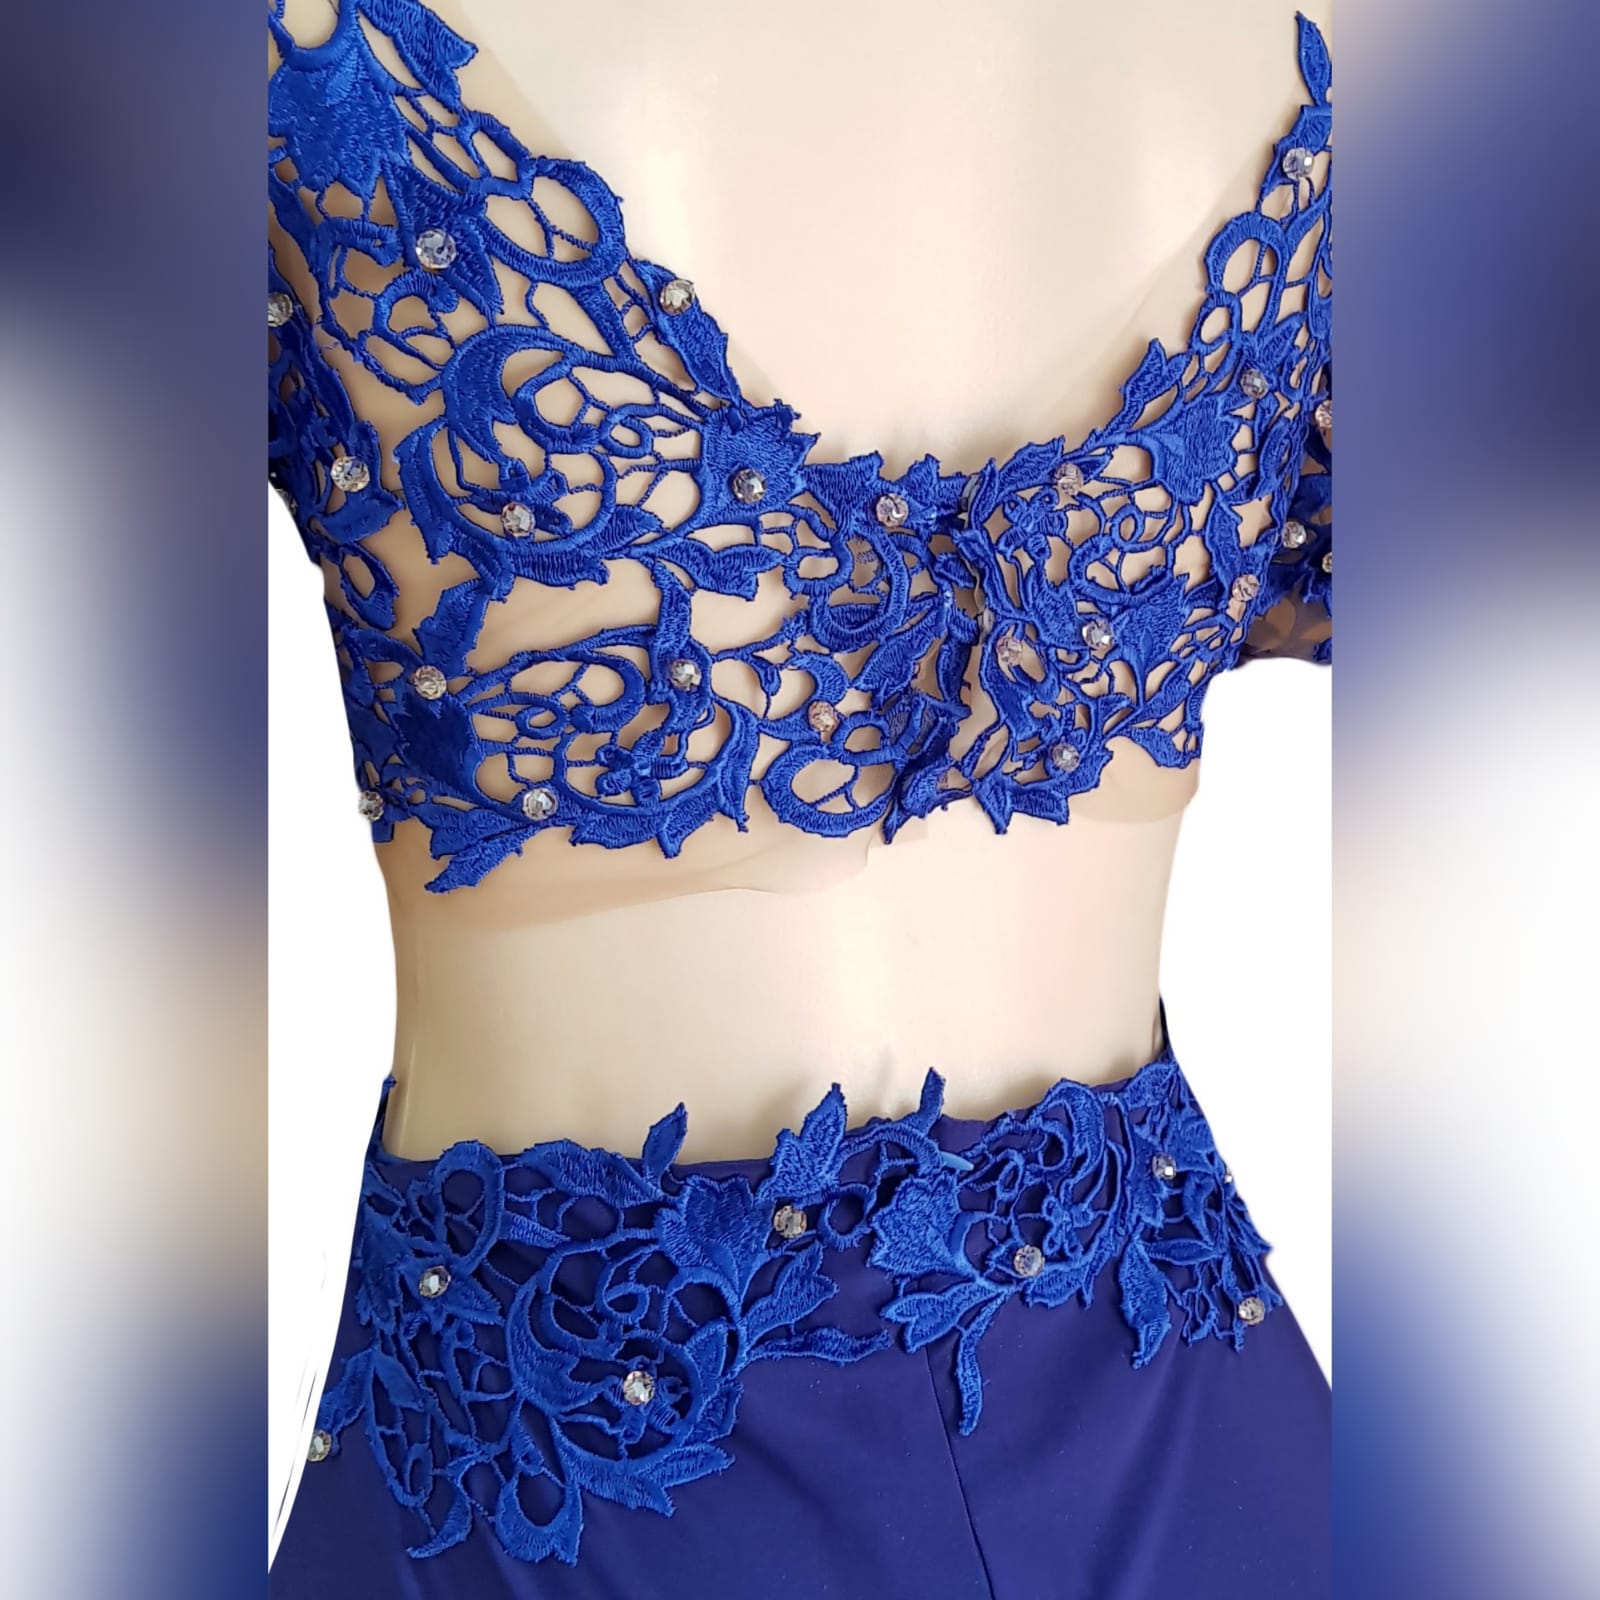 Royal blue shimmer long prom dress 5 royal blue shimmer long prom dress with a lace illusion bodice, side tummy & back opening with a sweetheart neckline. Slit and a train. Lace detailed with gold beads.